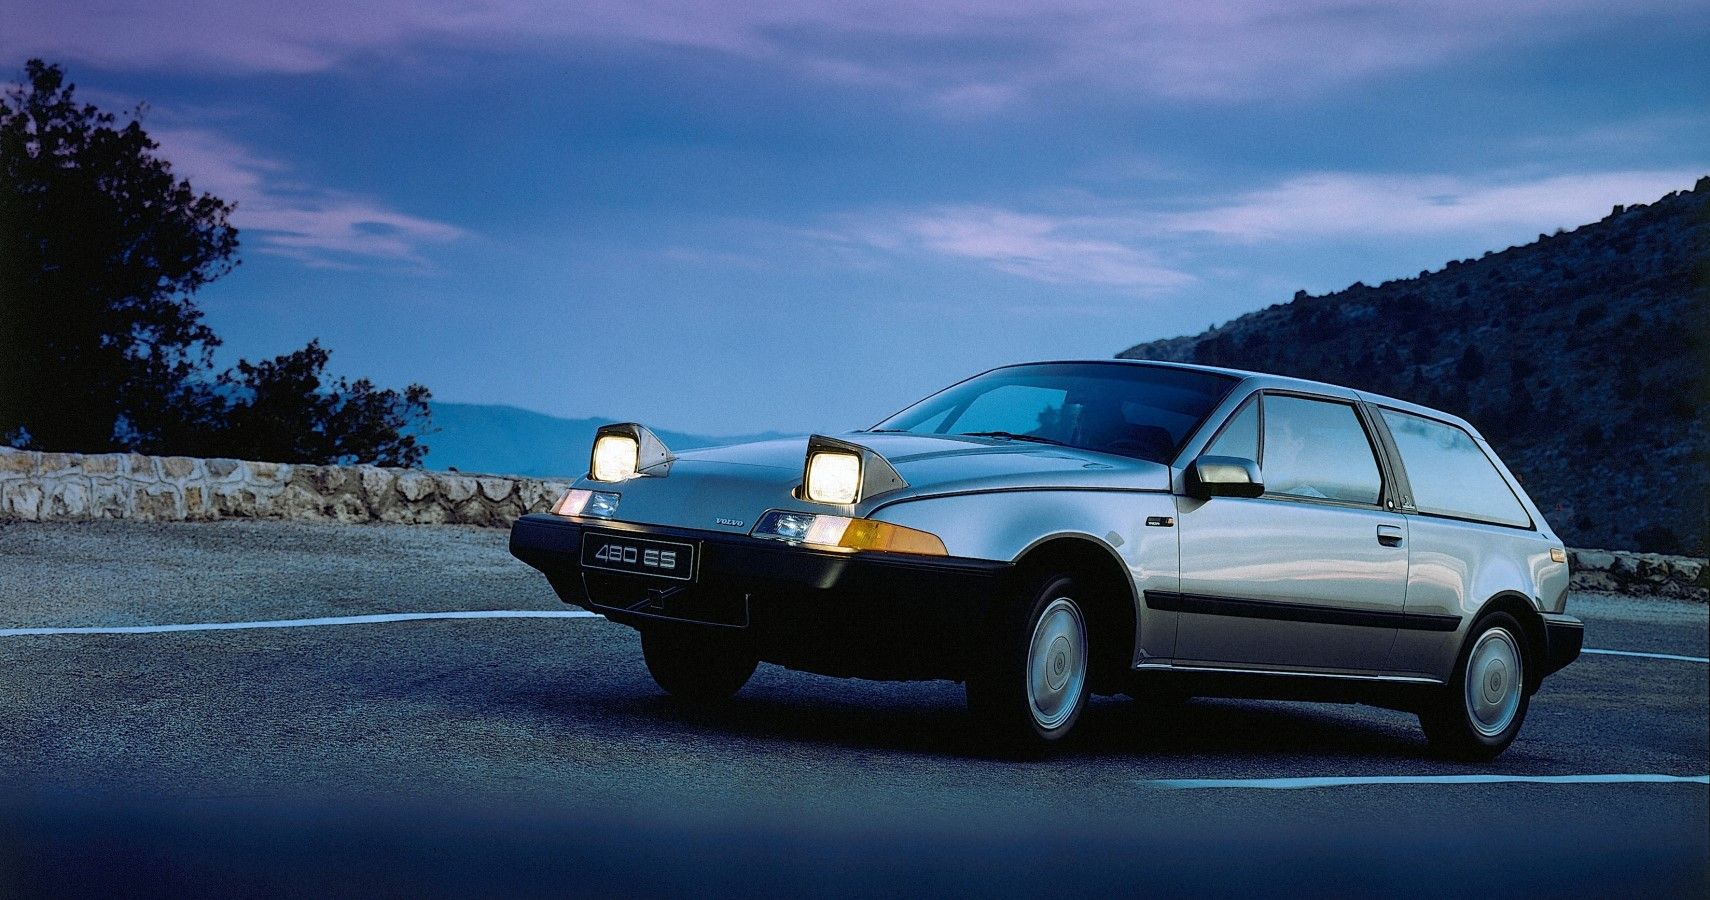 Volvo 480 was a weird car from the Swedes